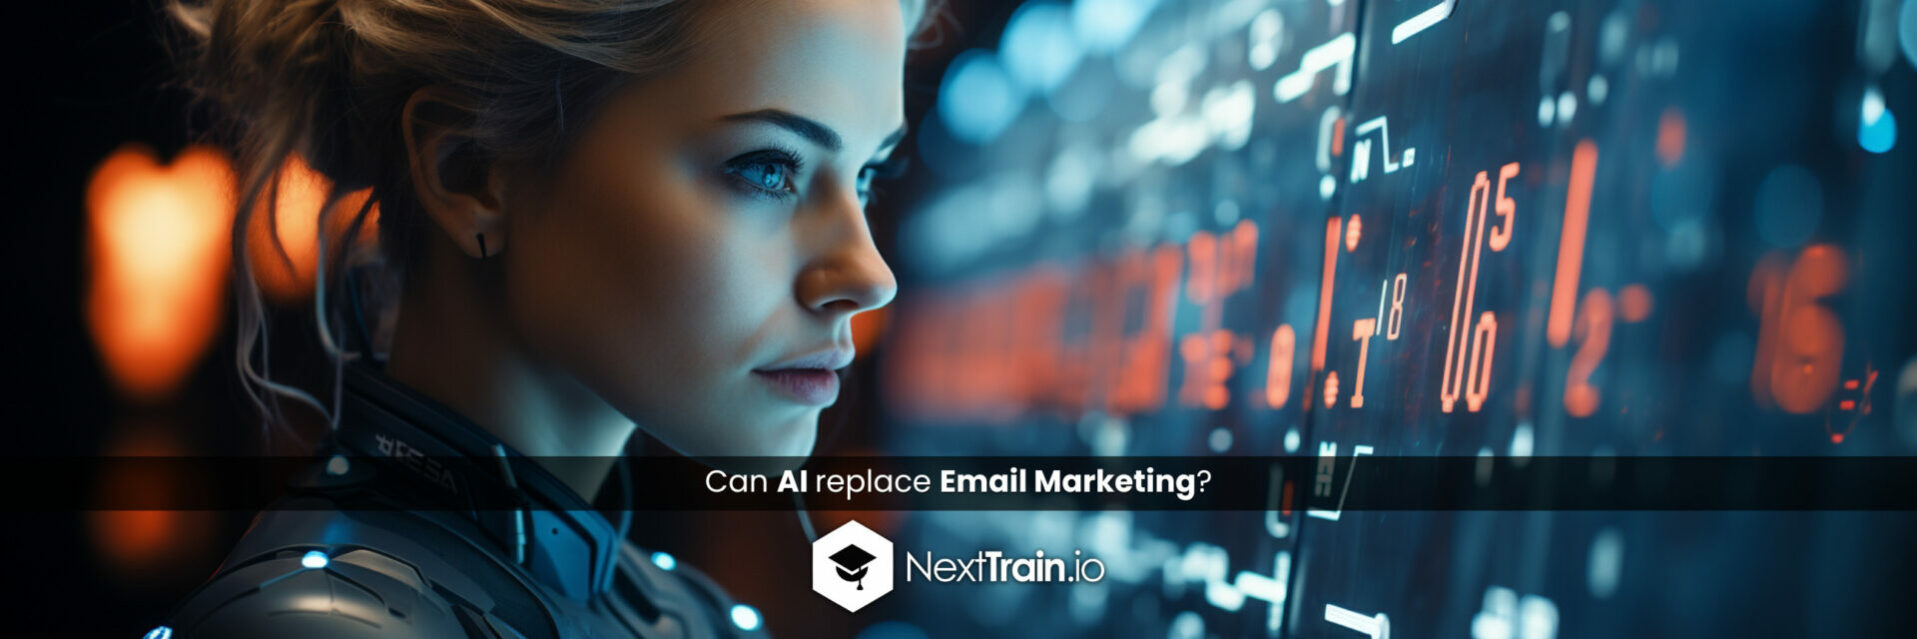 Can AI replace Email Marketing?